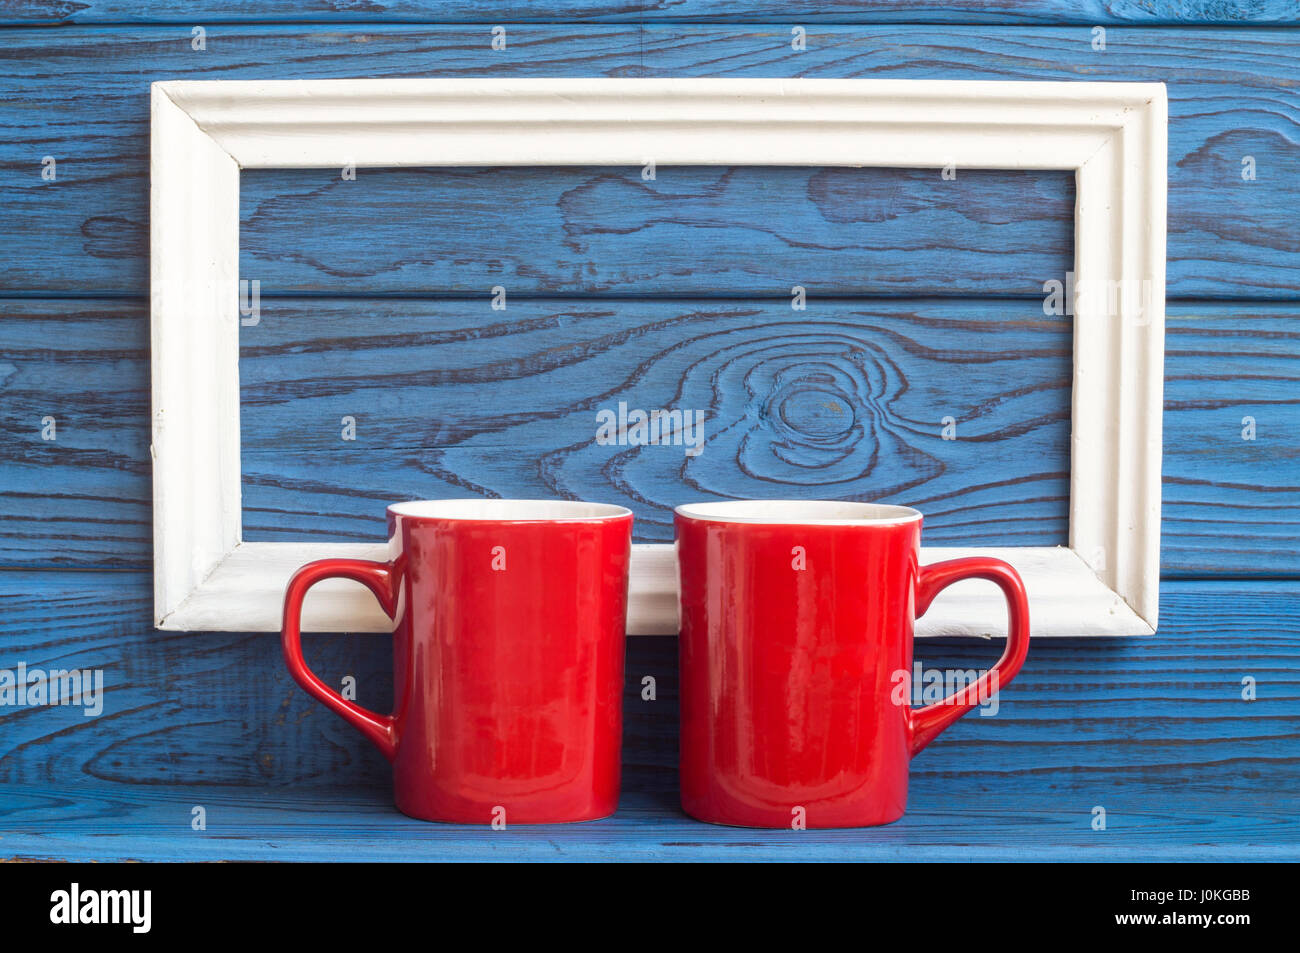 https://c8.alamy.com/comp/J0KGBB/white-frame-and-two-red-coffee-cups-on-a-background-of-blue-boards-J0KGBB.jpg